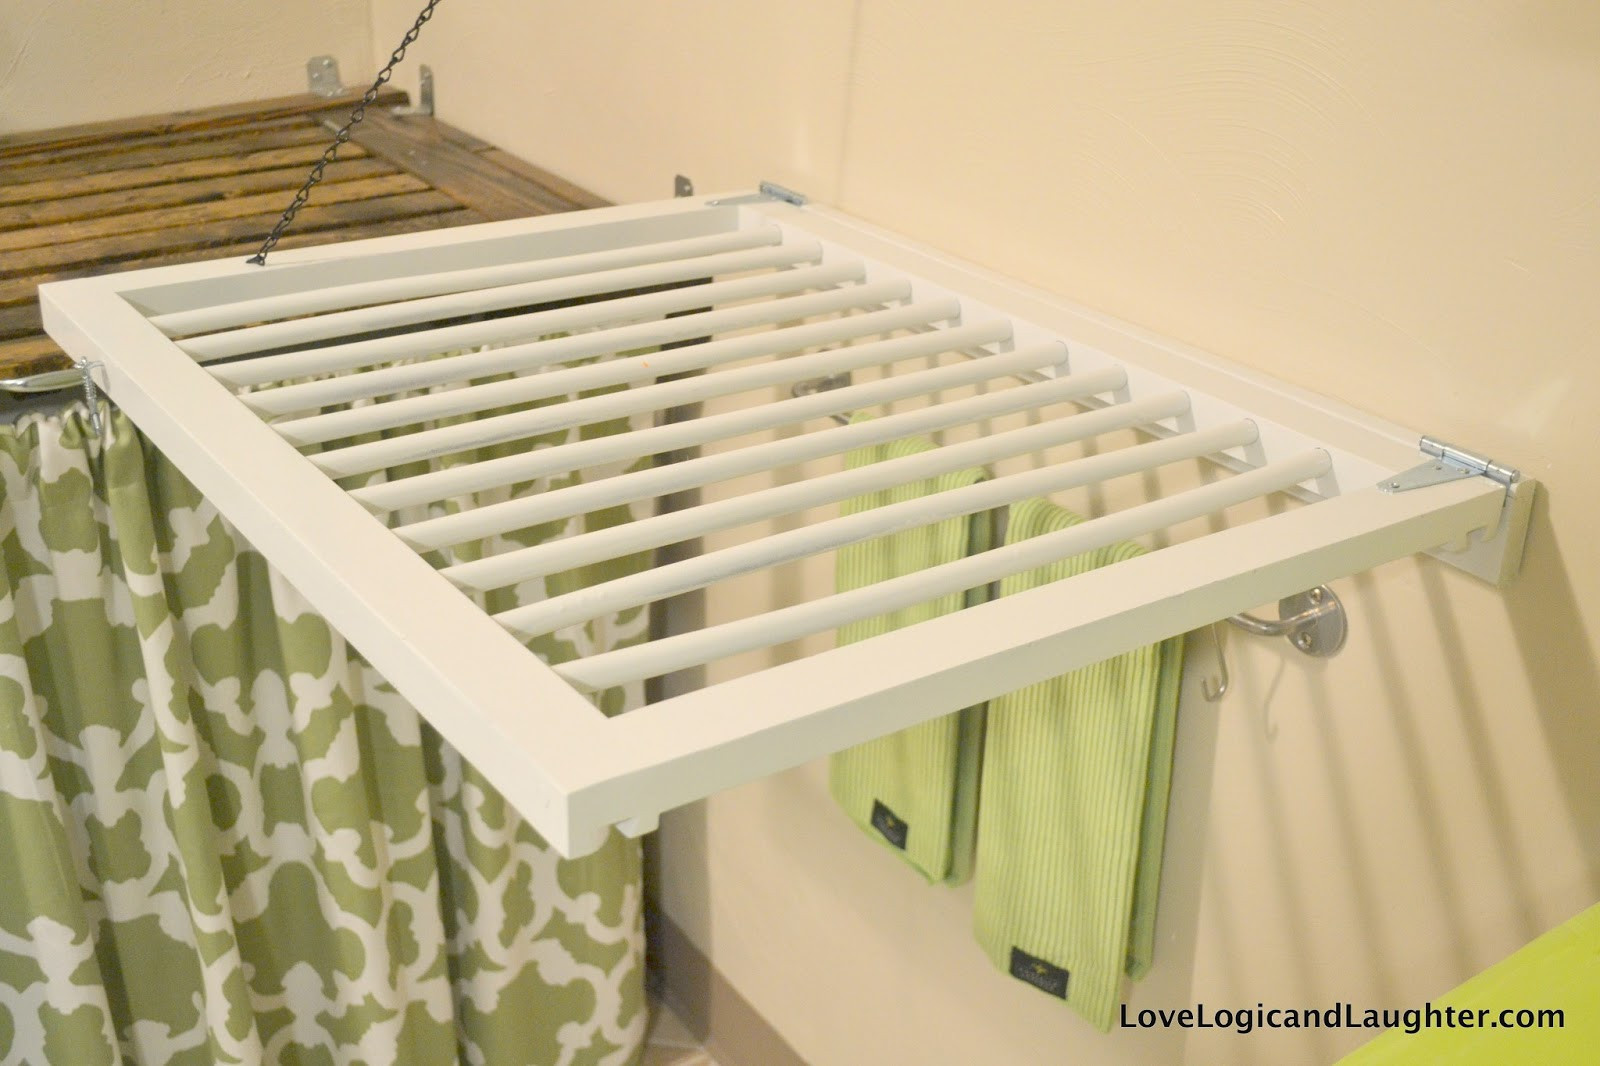 DIY Wall Mounted Laundry Drying Rack
 Diy Wall Folding Drying Rack Logic and Laughter